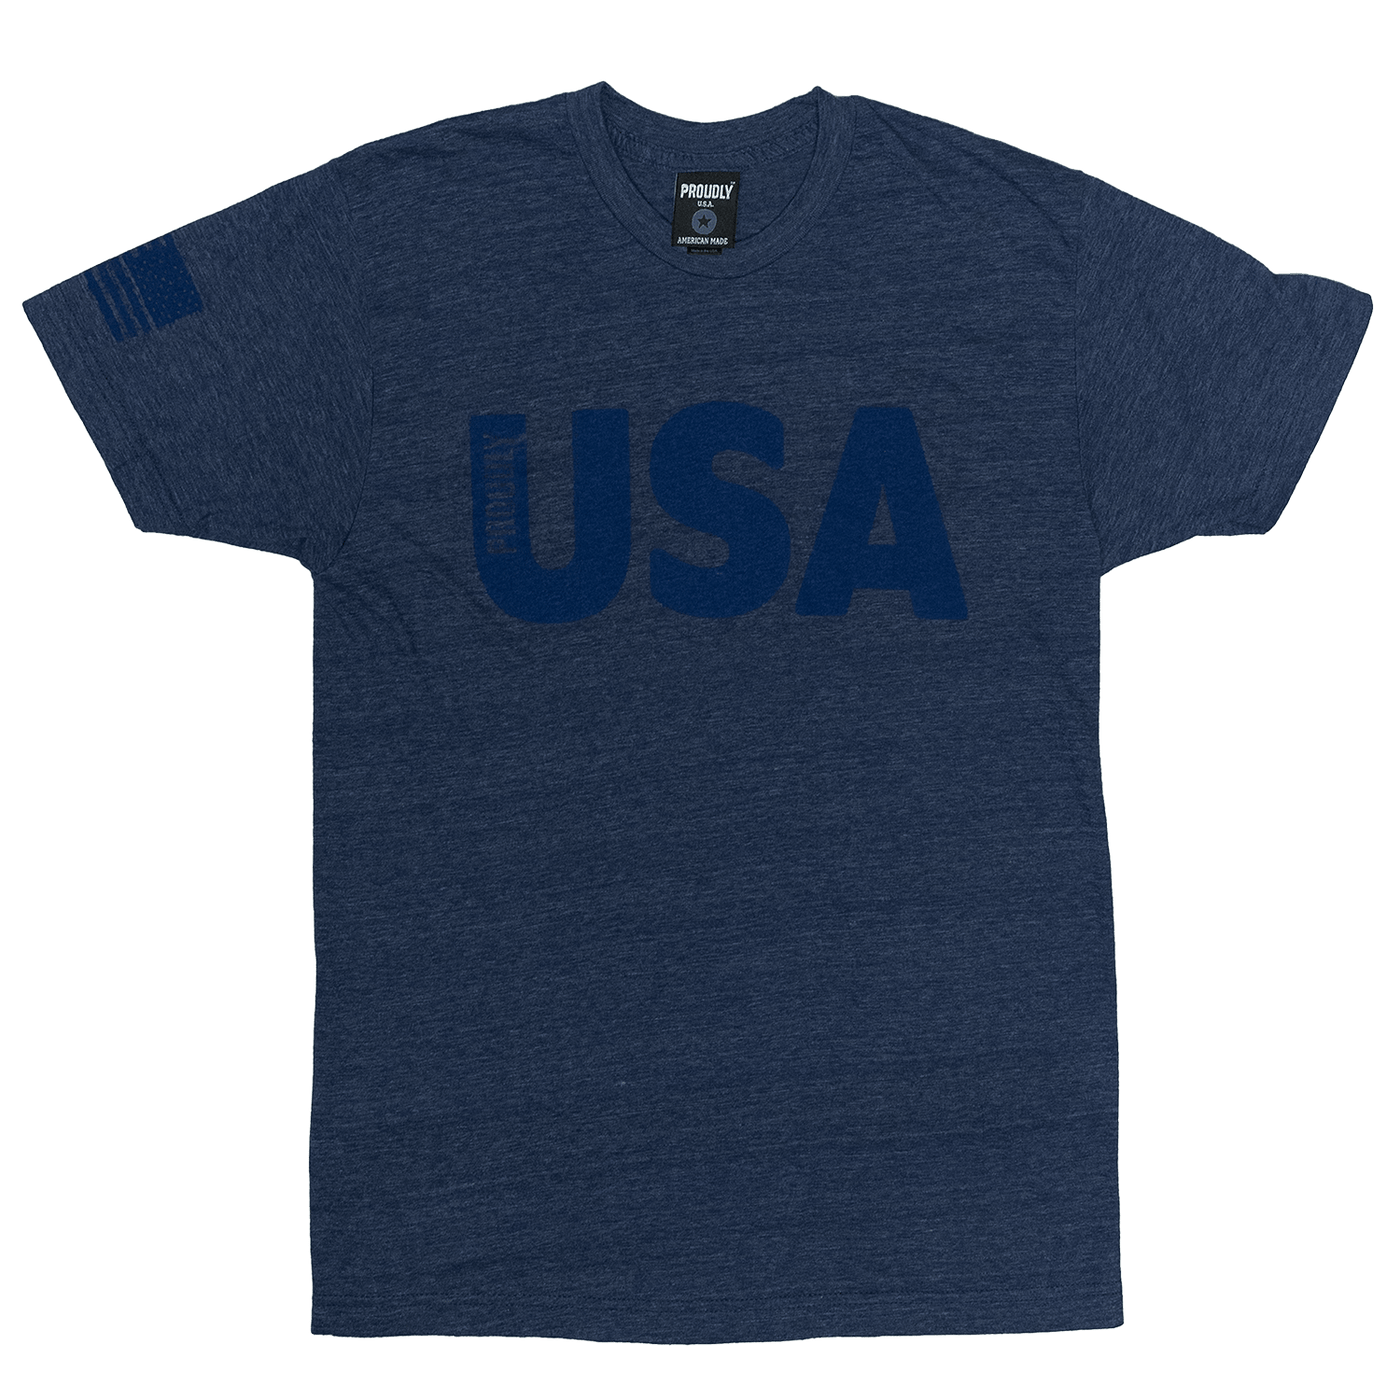 Heather Denim Blue Tri-Blend T-Shirt With Patriotic USA Graphics Printed on Chest and Sleeve